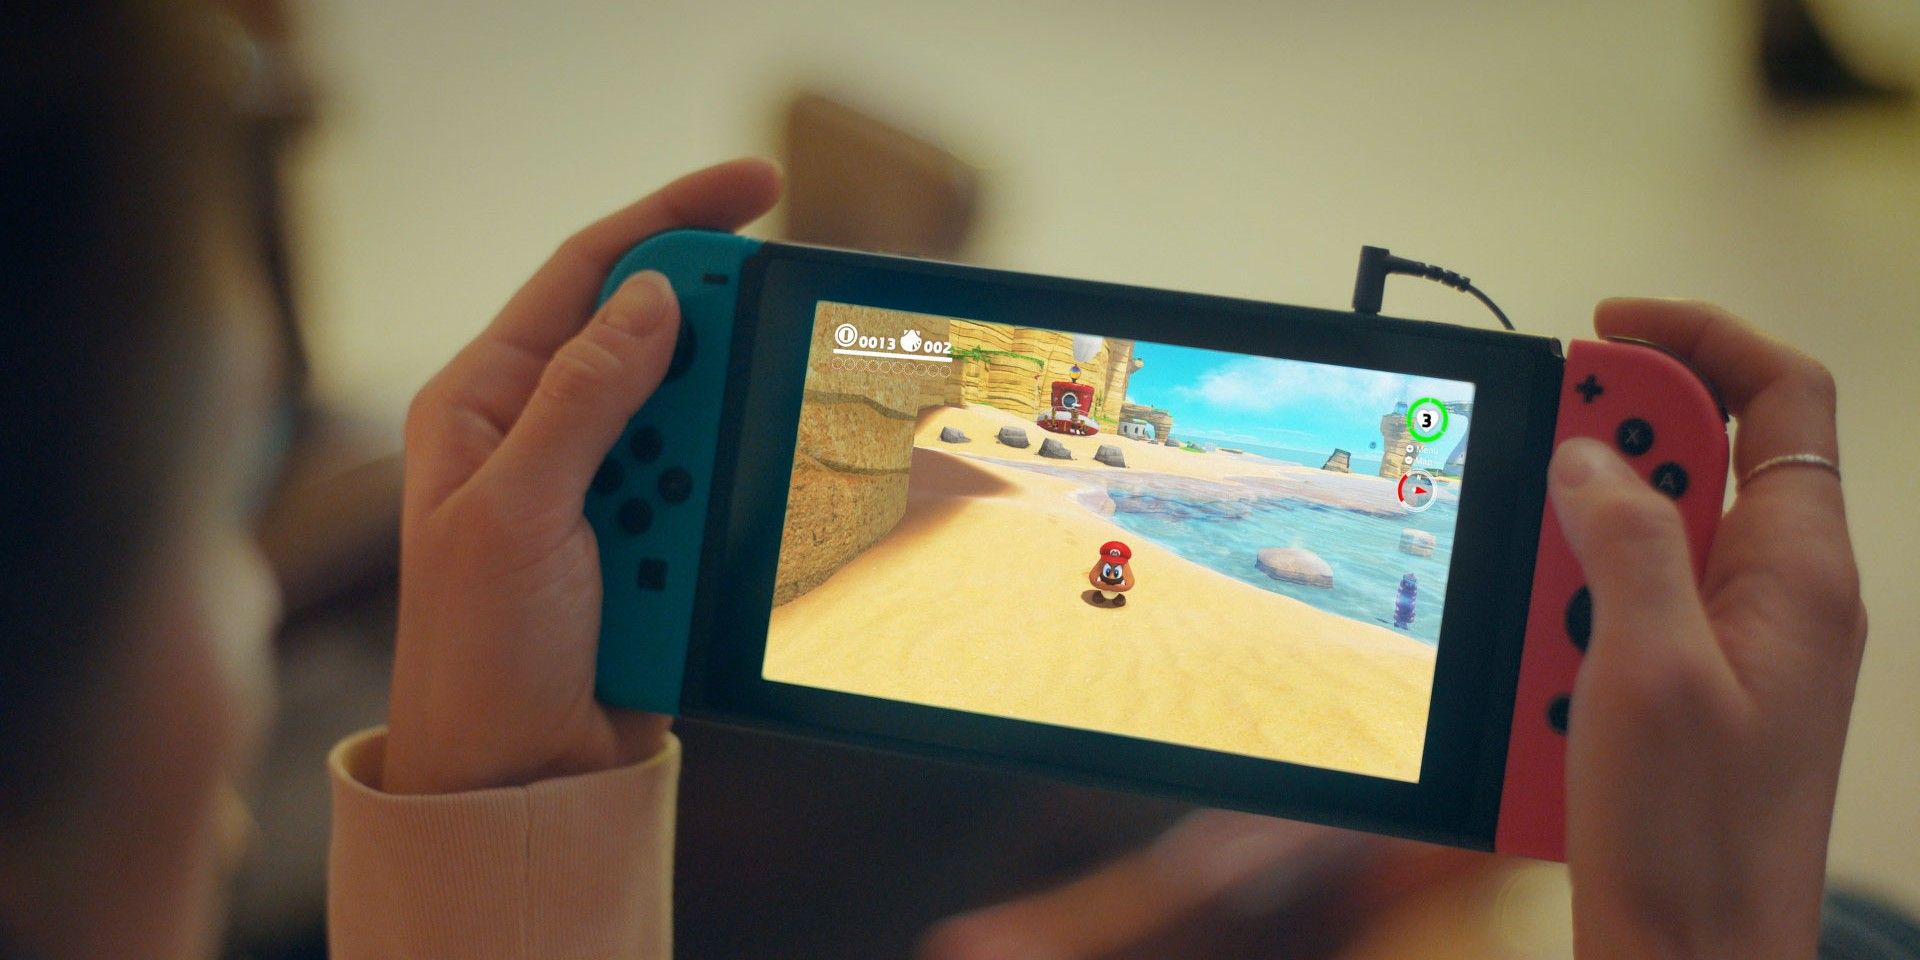 Nintendo Switch console in handheld mode.